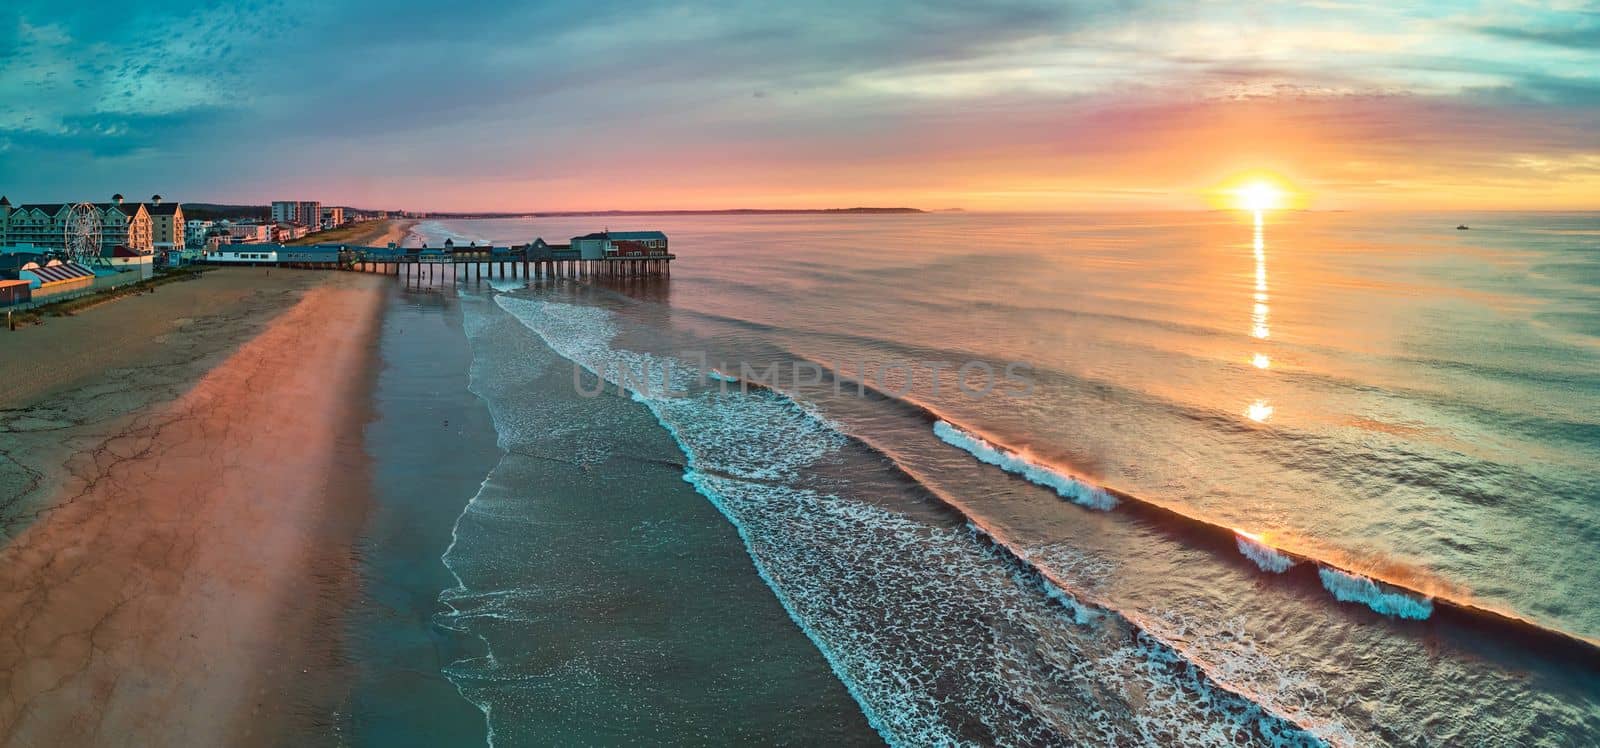 Image of Wood pier, beach, and shops with ocean waves from above during sunrise light